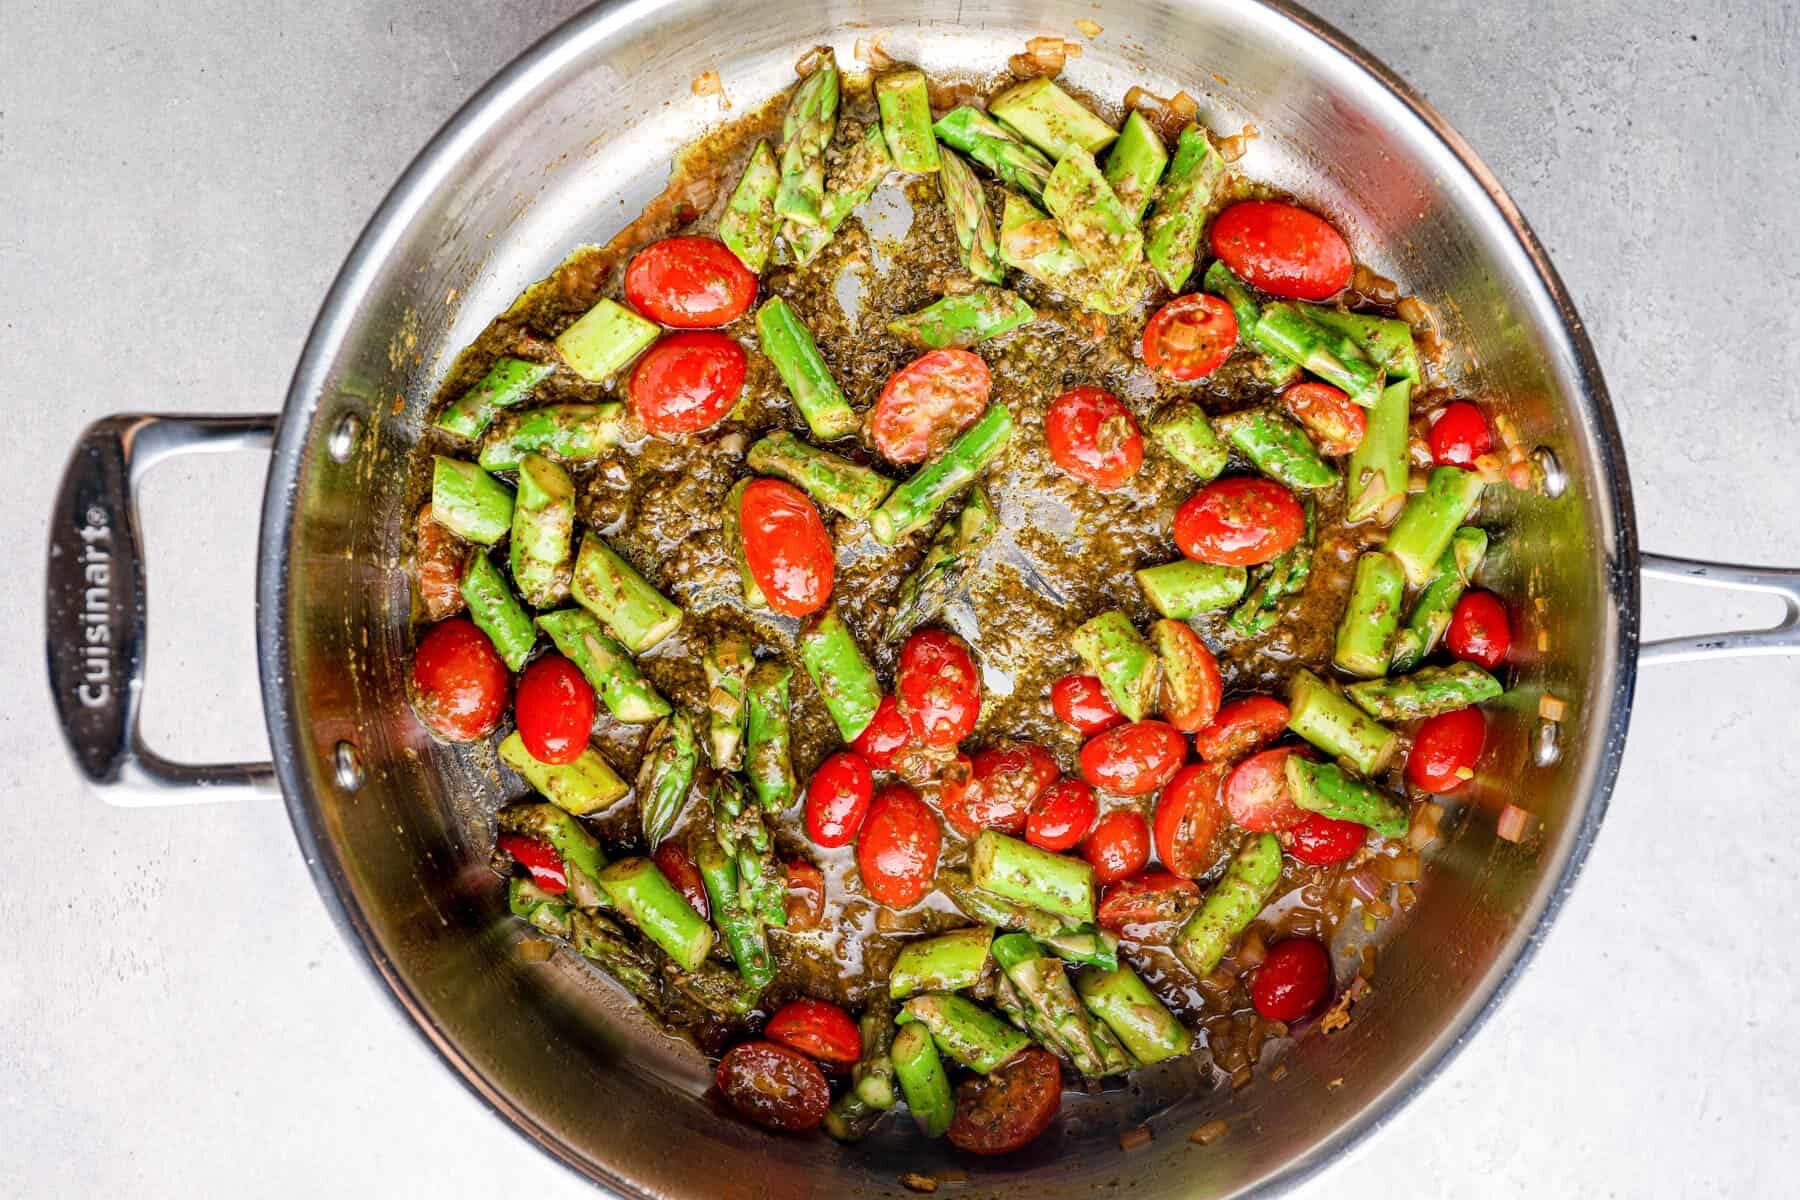 tomatoes and asparagus in a skillet